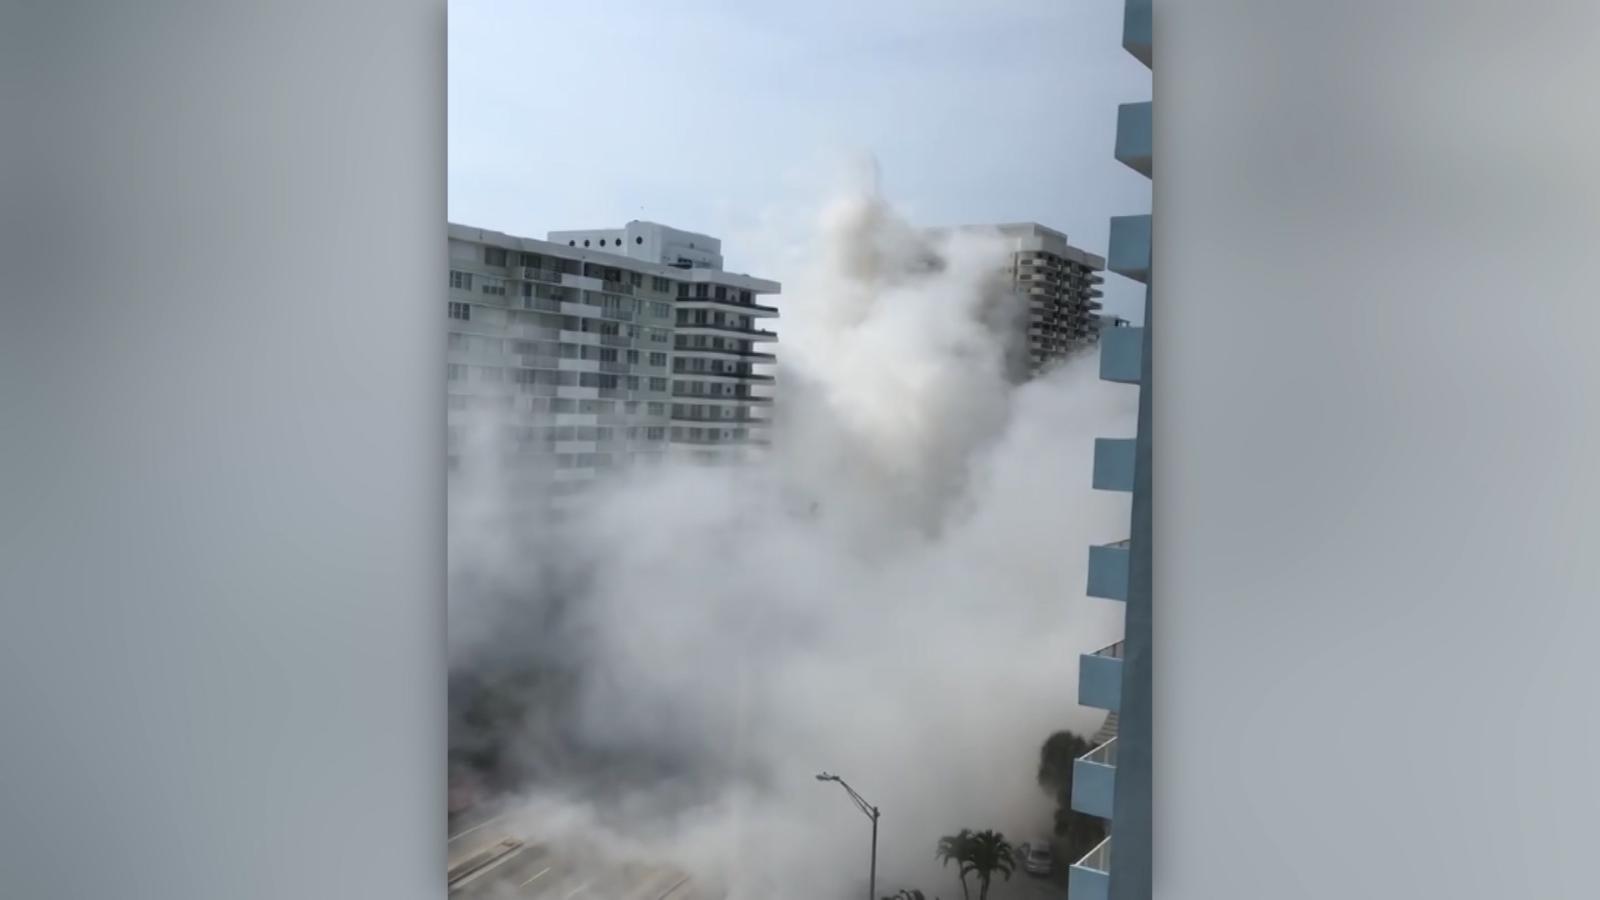 Miami Building Collapses Unexpectedly Cnn Video